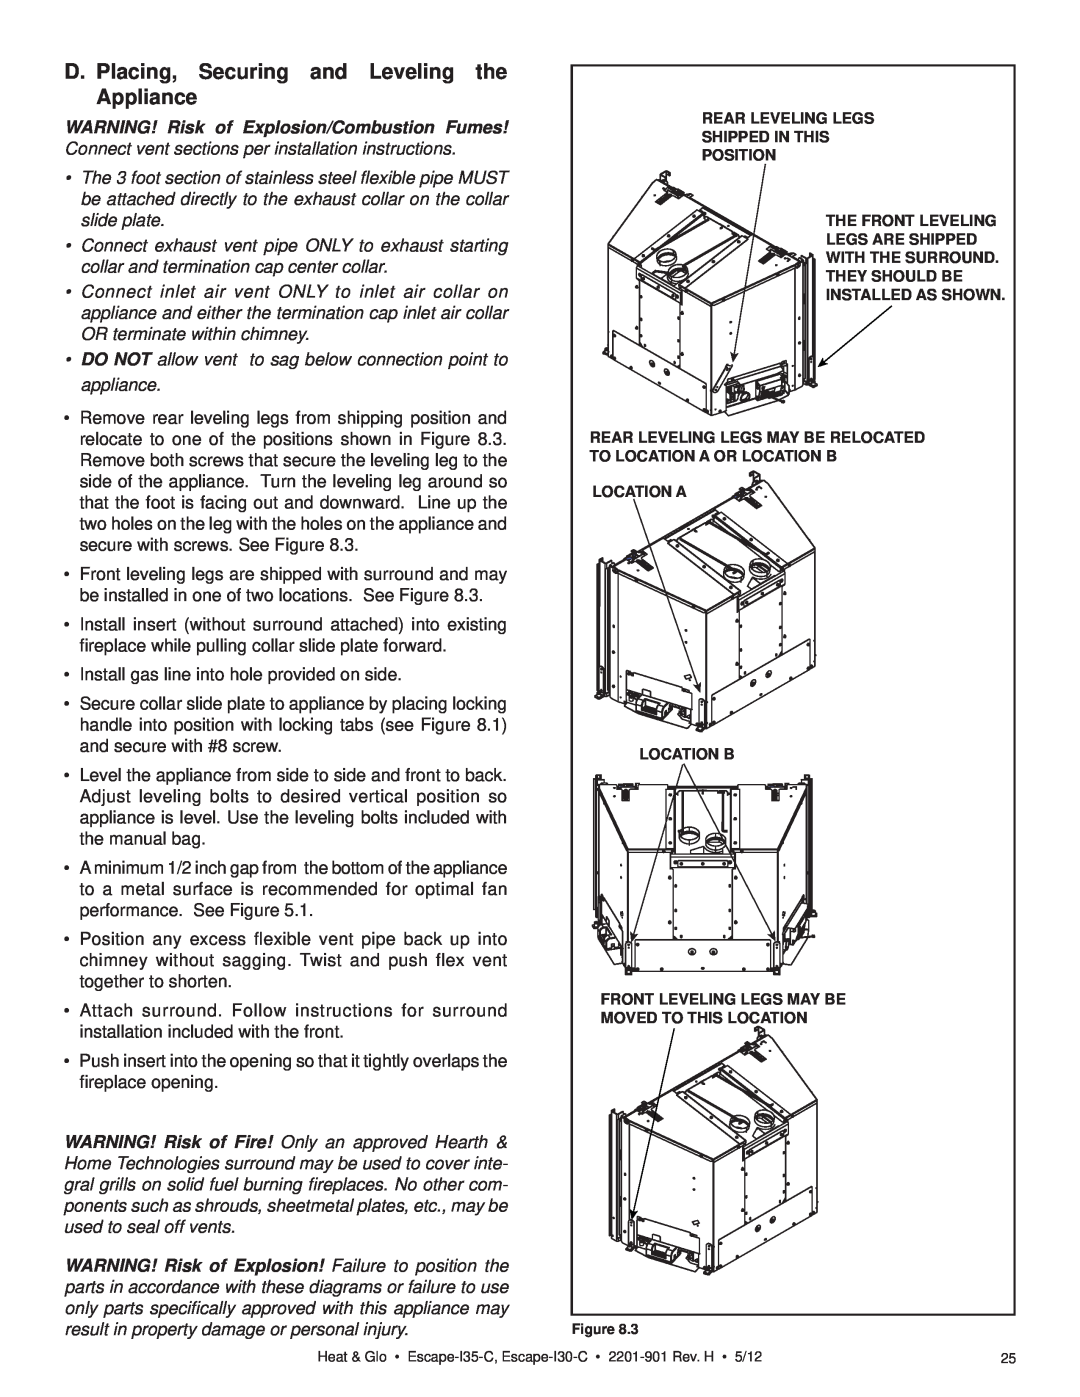 Heat & Glo LifeStyle ESCAPE-I35-C owner manual D. Placing, Securing and Leveling the Appliance 